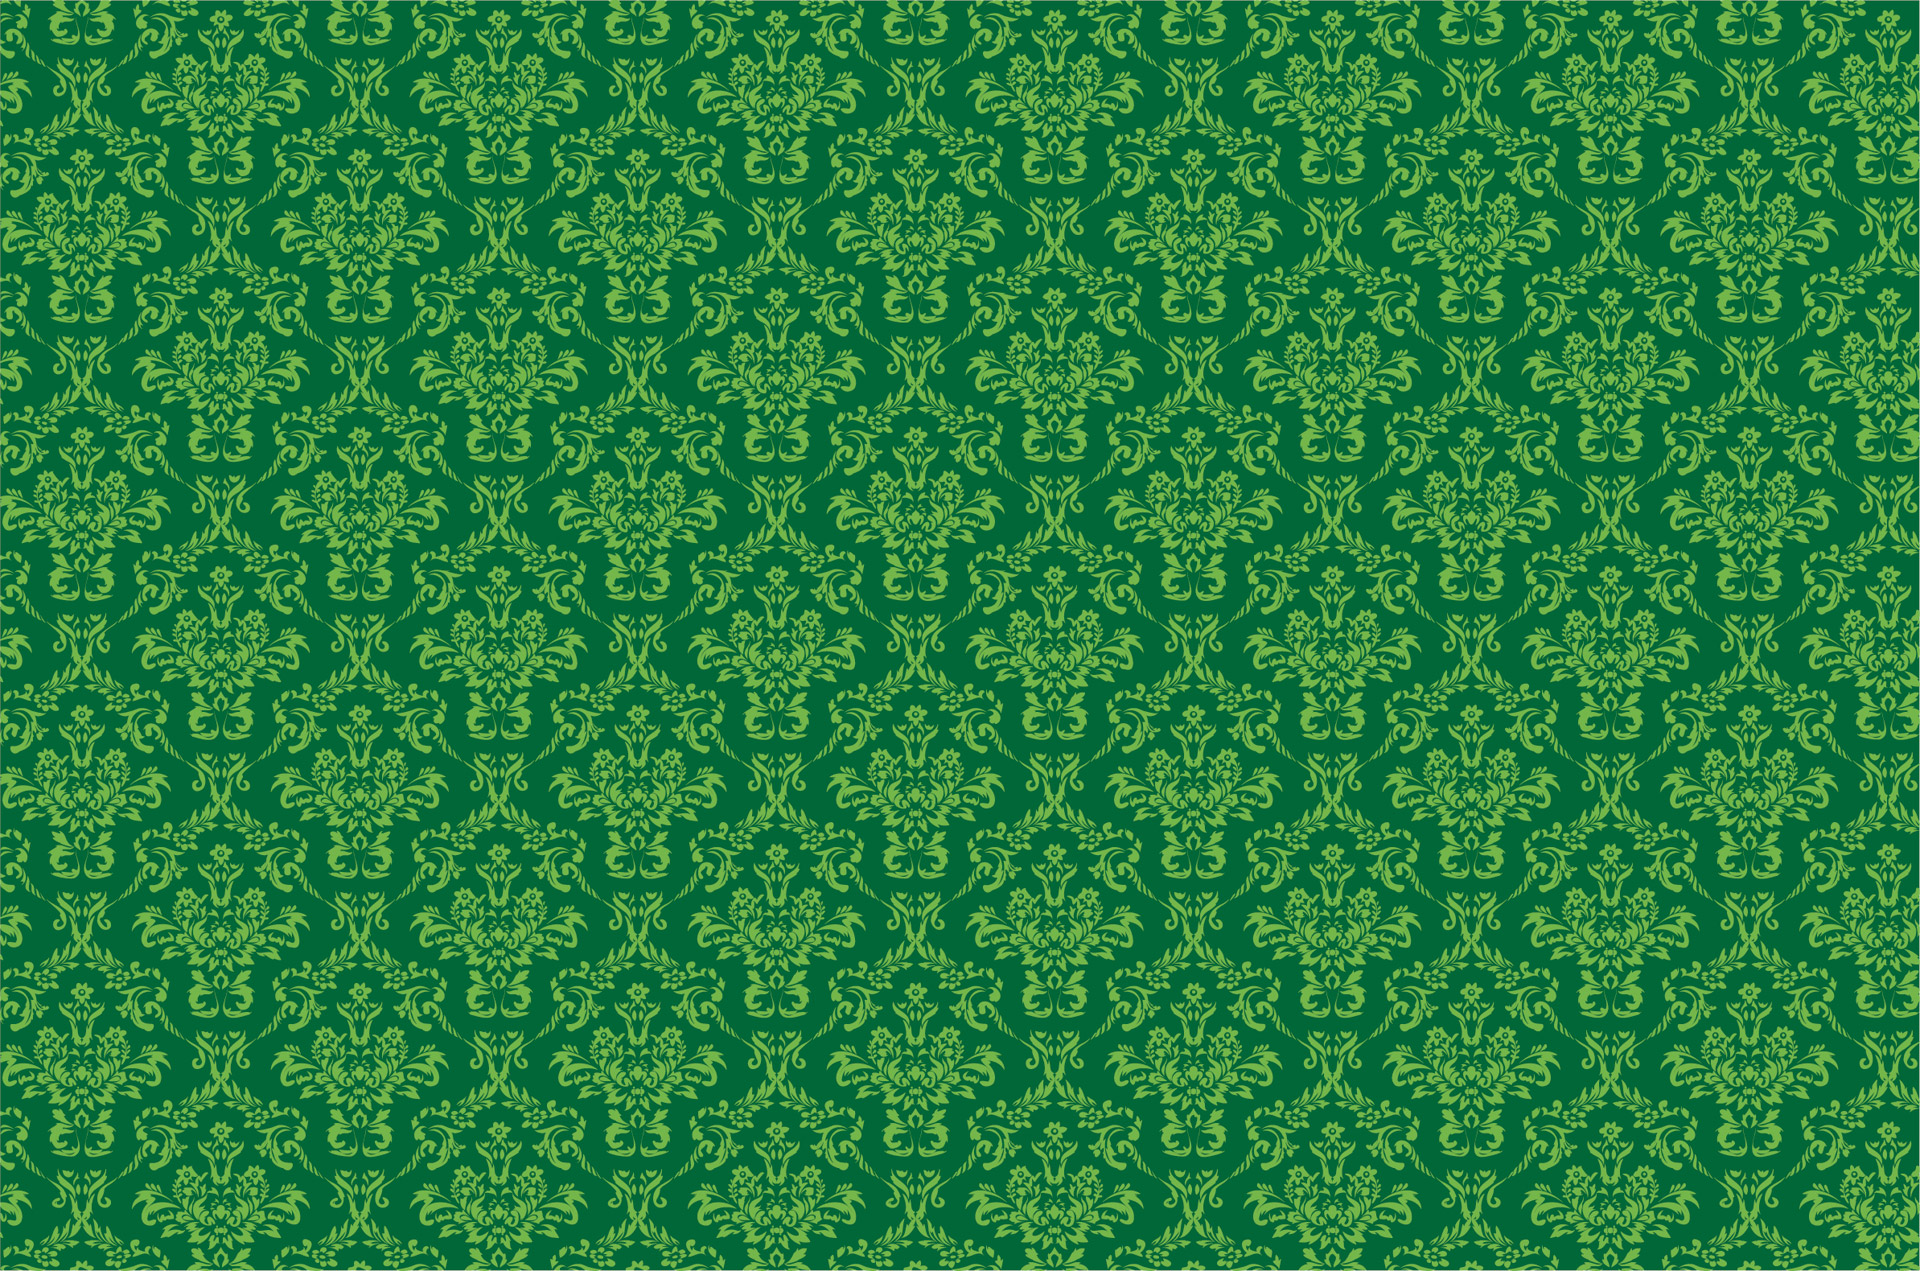 Damask pattern background wallpaper in green for scrapbooking